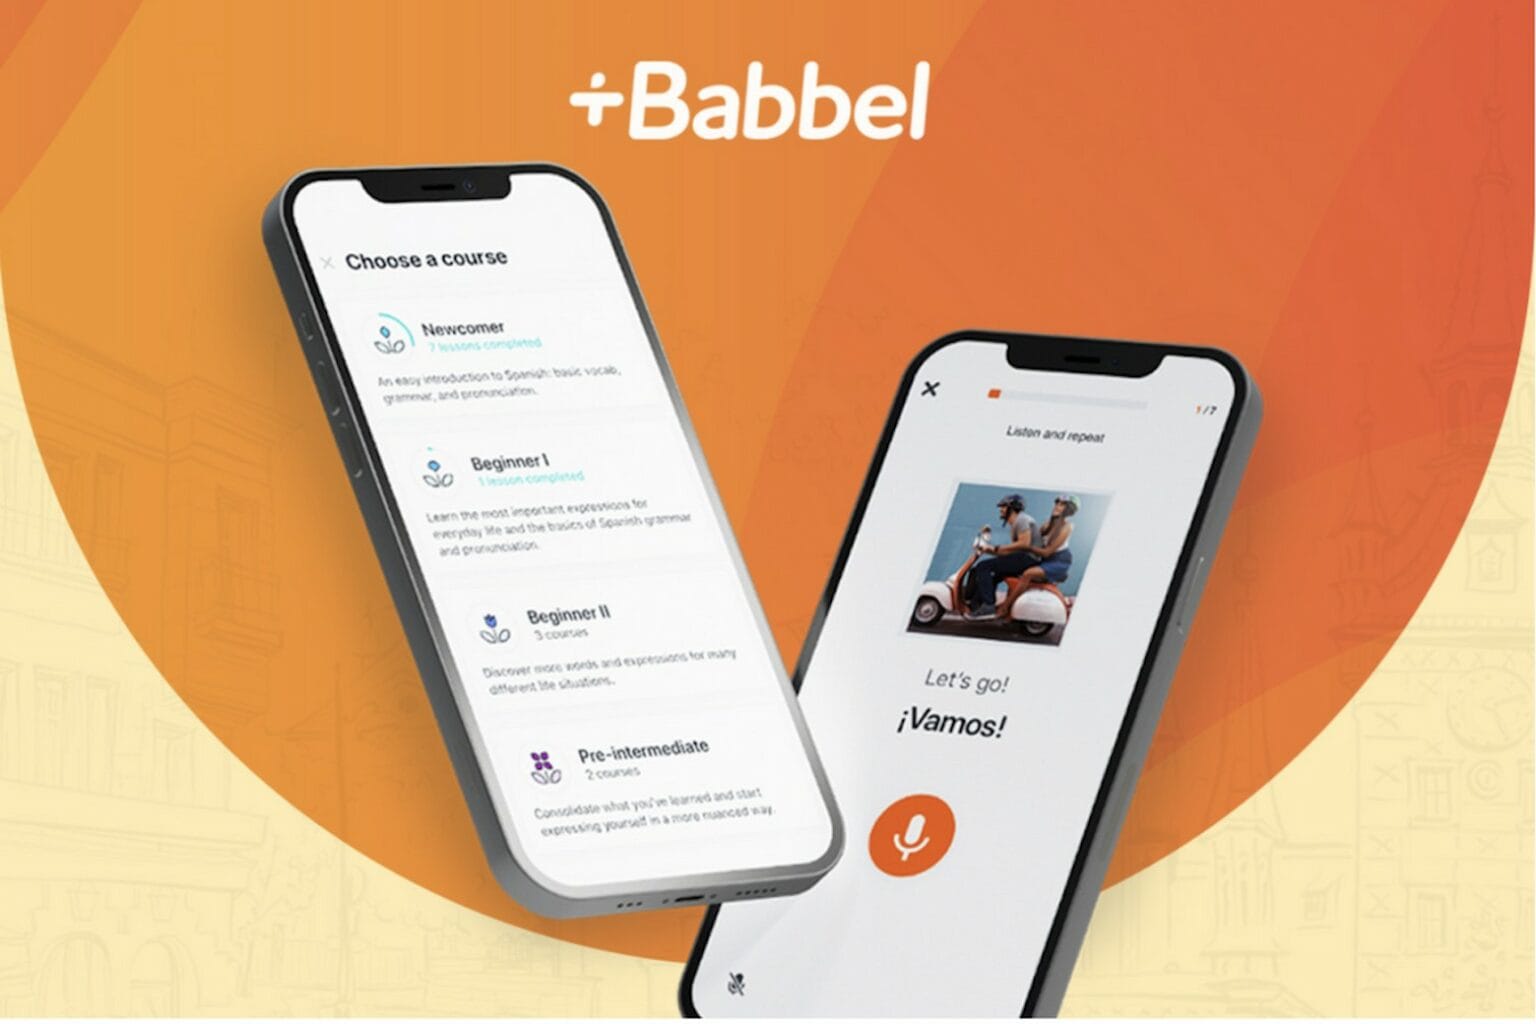 Don't sleep on a $200 price drop for a lifetime of Babbel language learning.